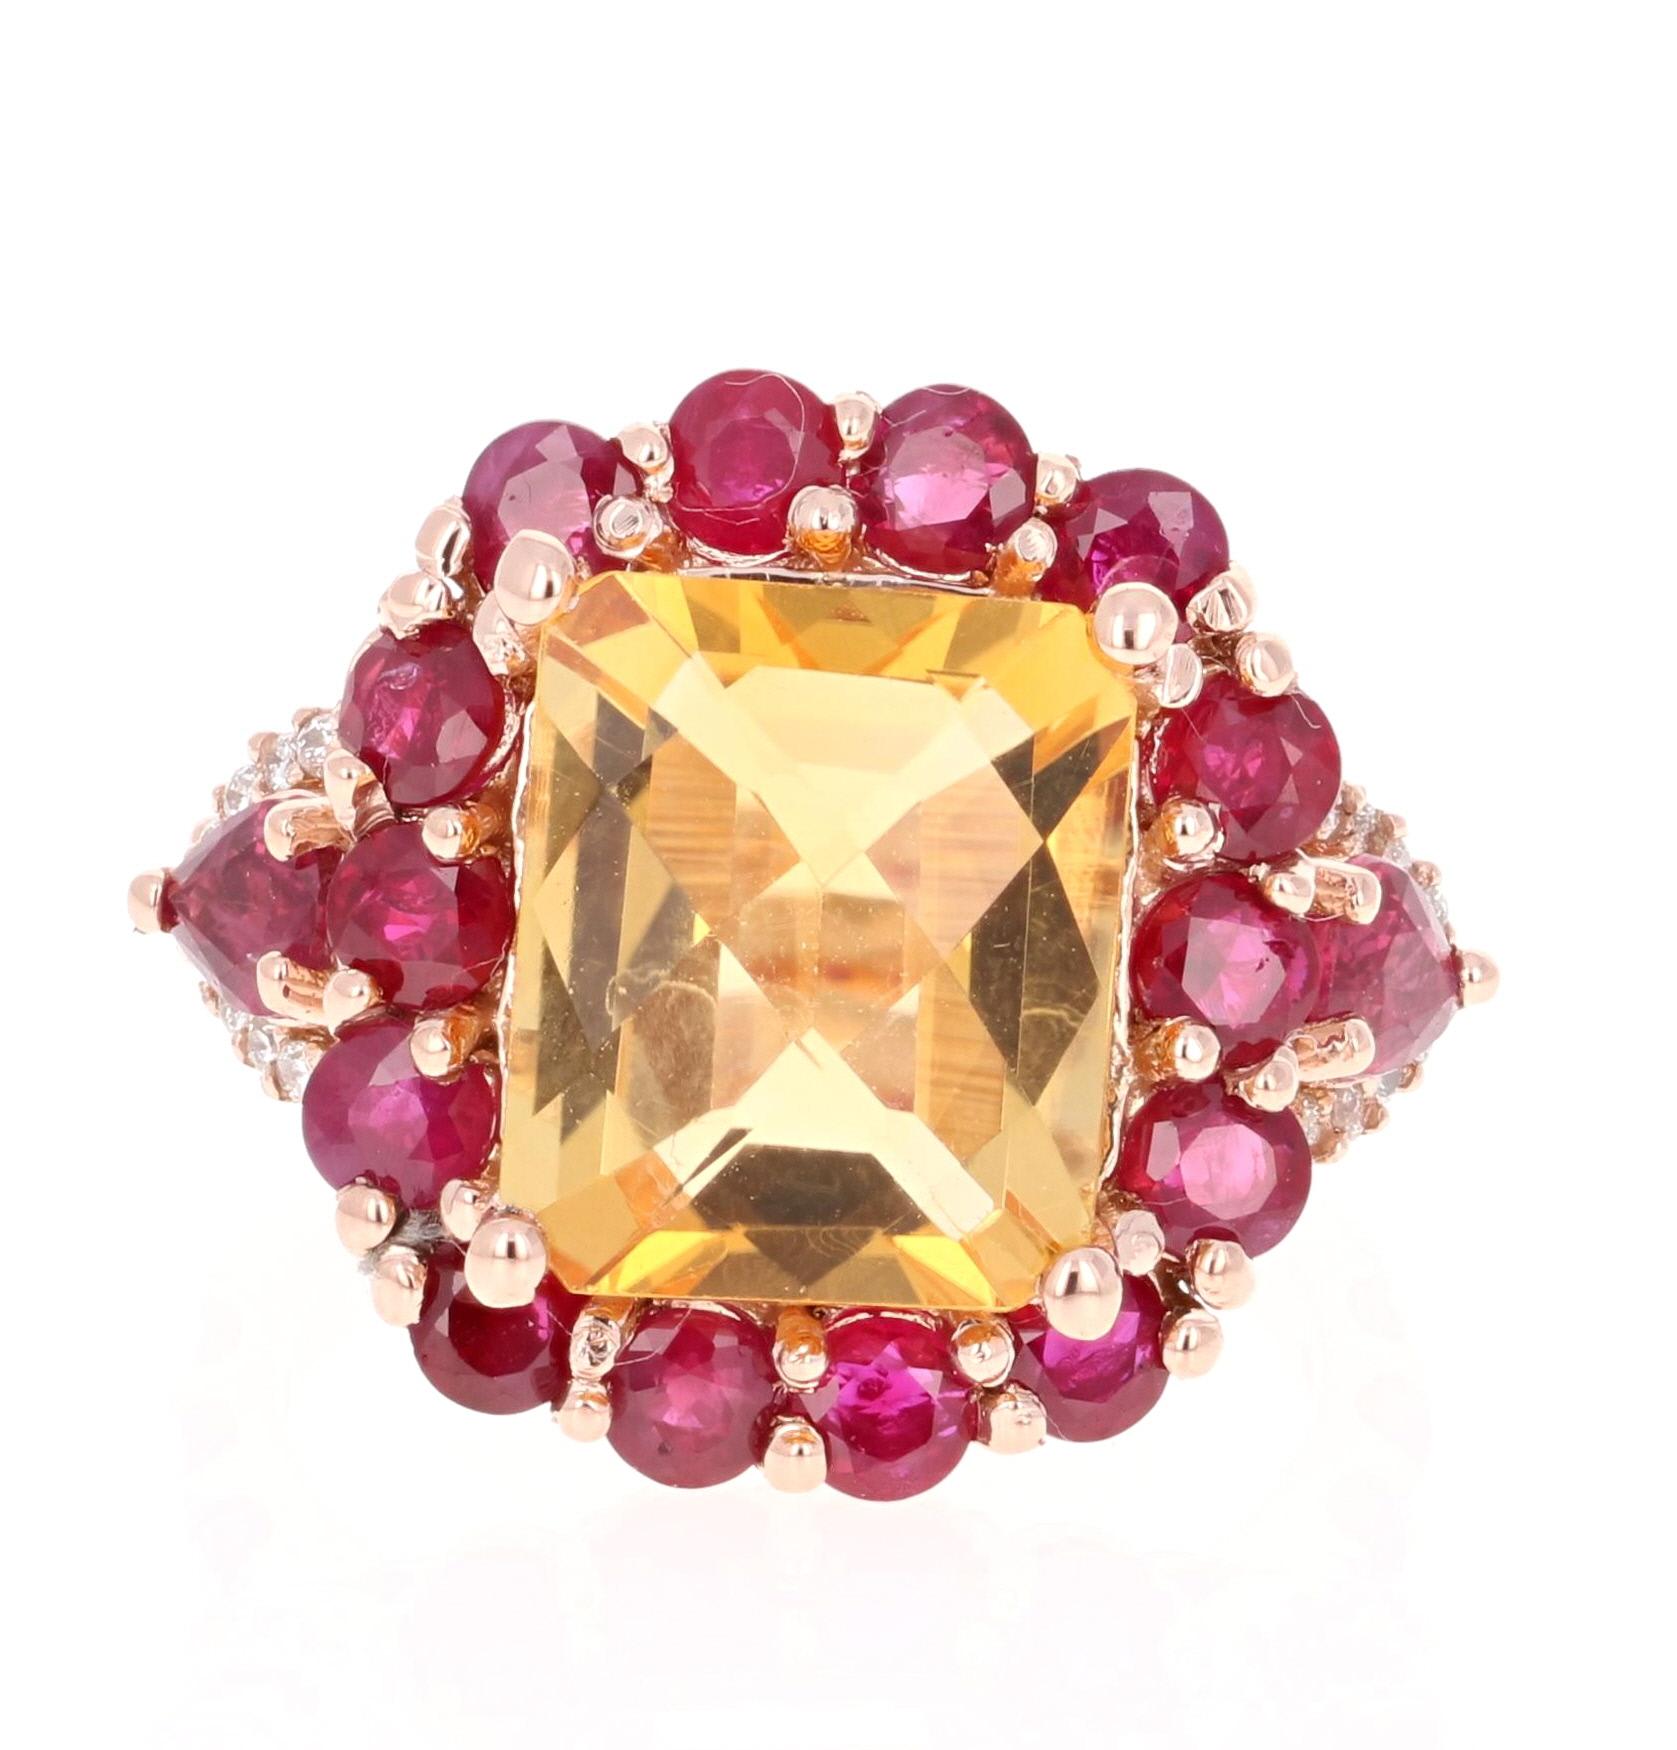 A Stunning and Unique piece to say the least! 

This magnificent ring has a bold Emerald Cut Citrine that is blazing yellow! It weighs 4.88 Carats and is surrounded by a beautiful row of 20 Round Cut Burmese Rubies that weigh 2.73 Carats.   Along